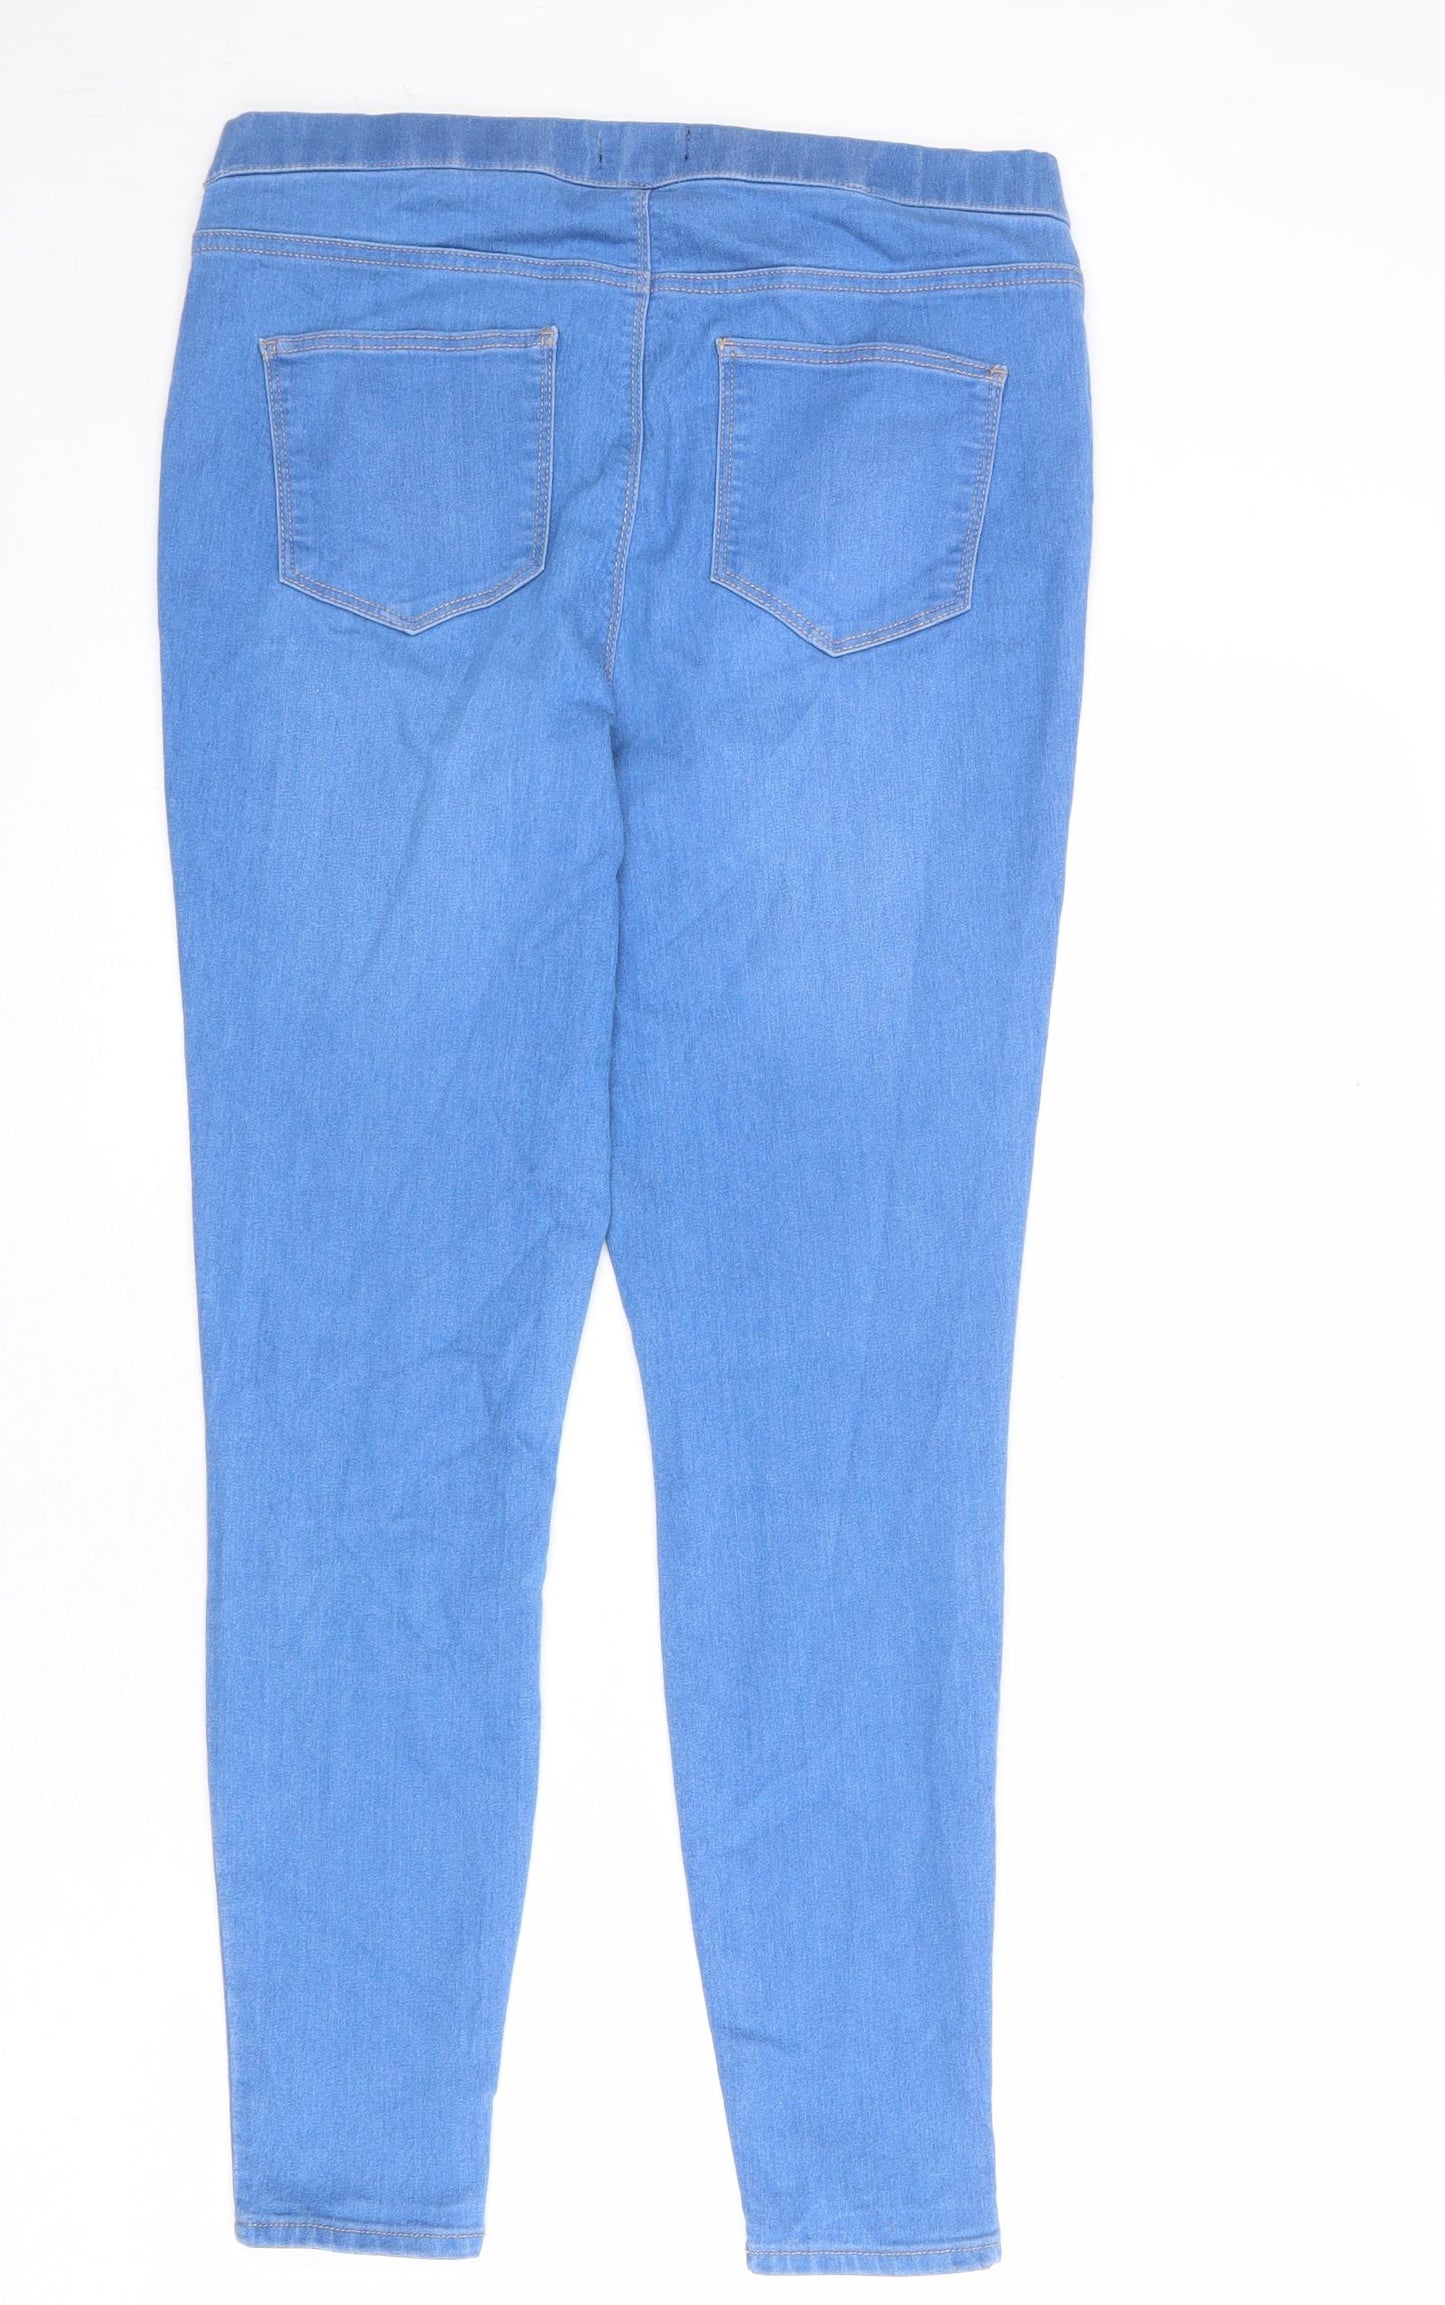 Matalan Womens Blue Cotton Jegging Jeans Size 12 L28 in Regular